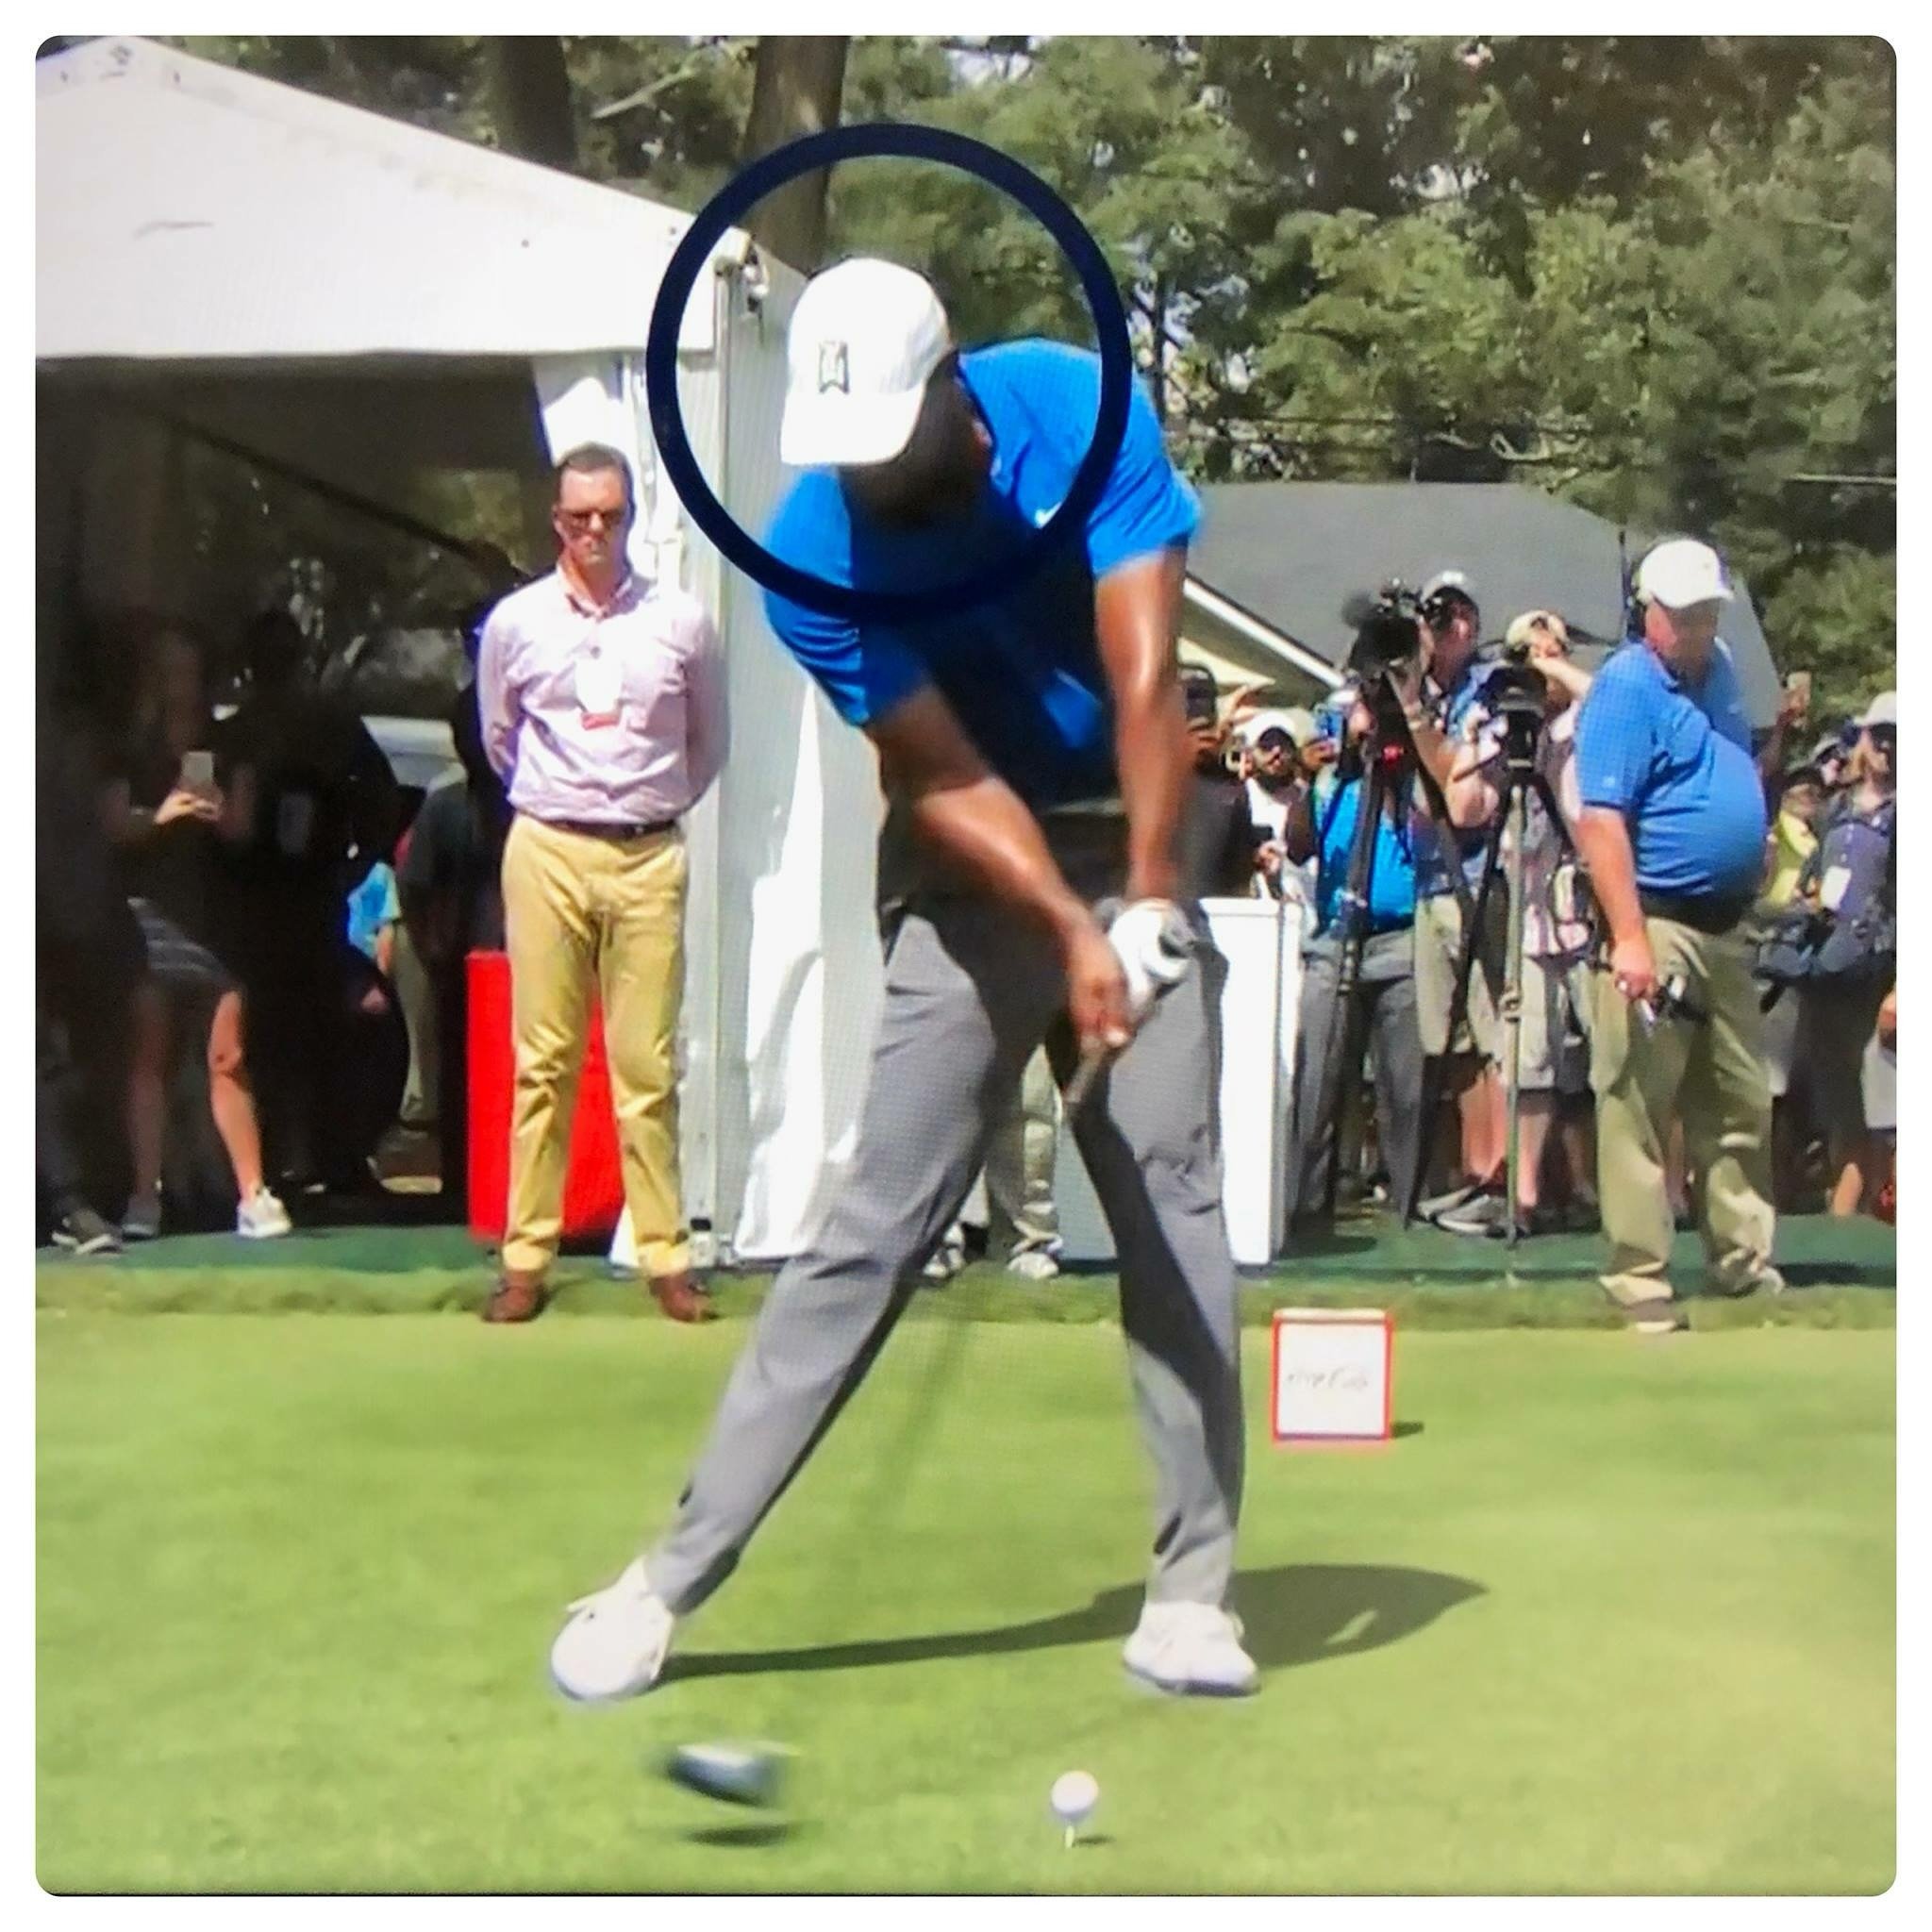 @tigerwoods showing us how it&rsquo;s done!  Handle forward and head back. 

Great question for you&hellip; what does handle forward promote?